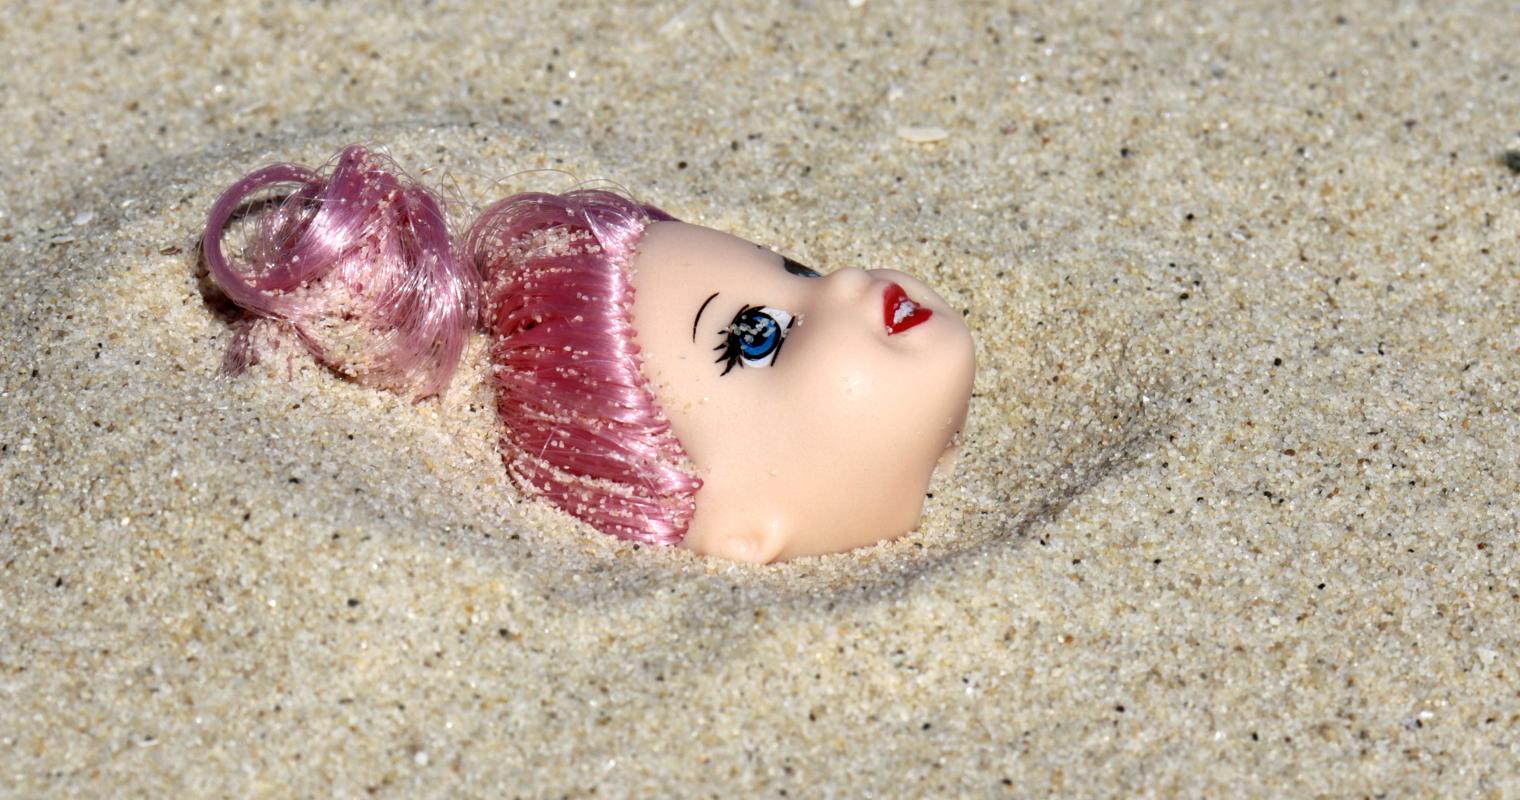 image of a barbie face protruding from the sand